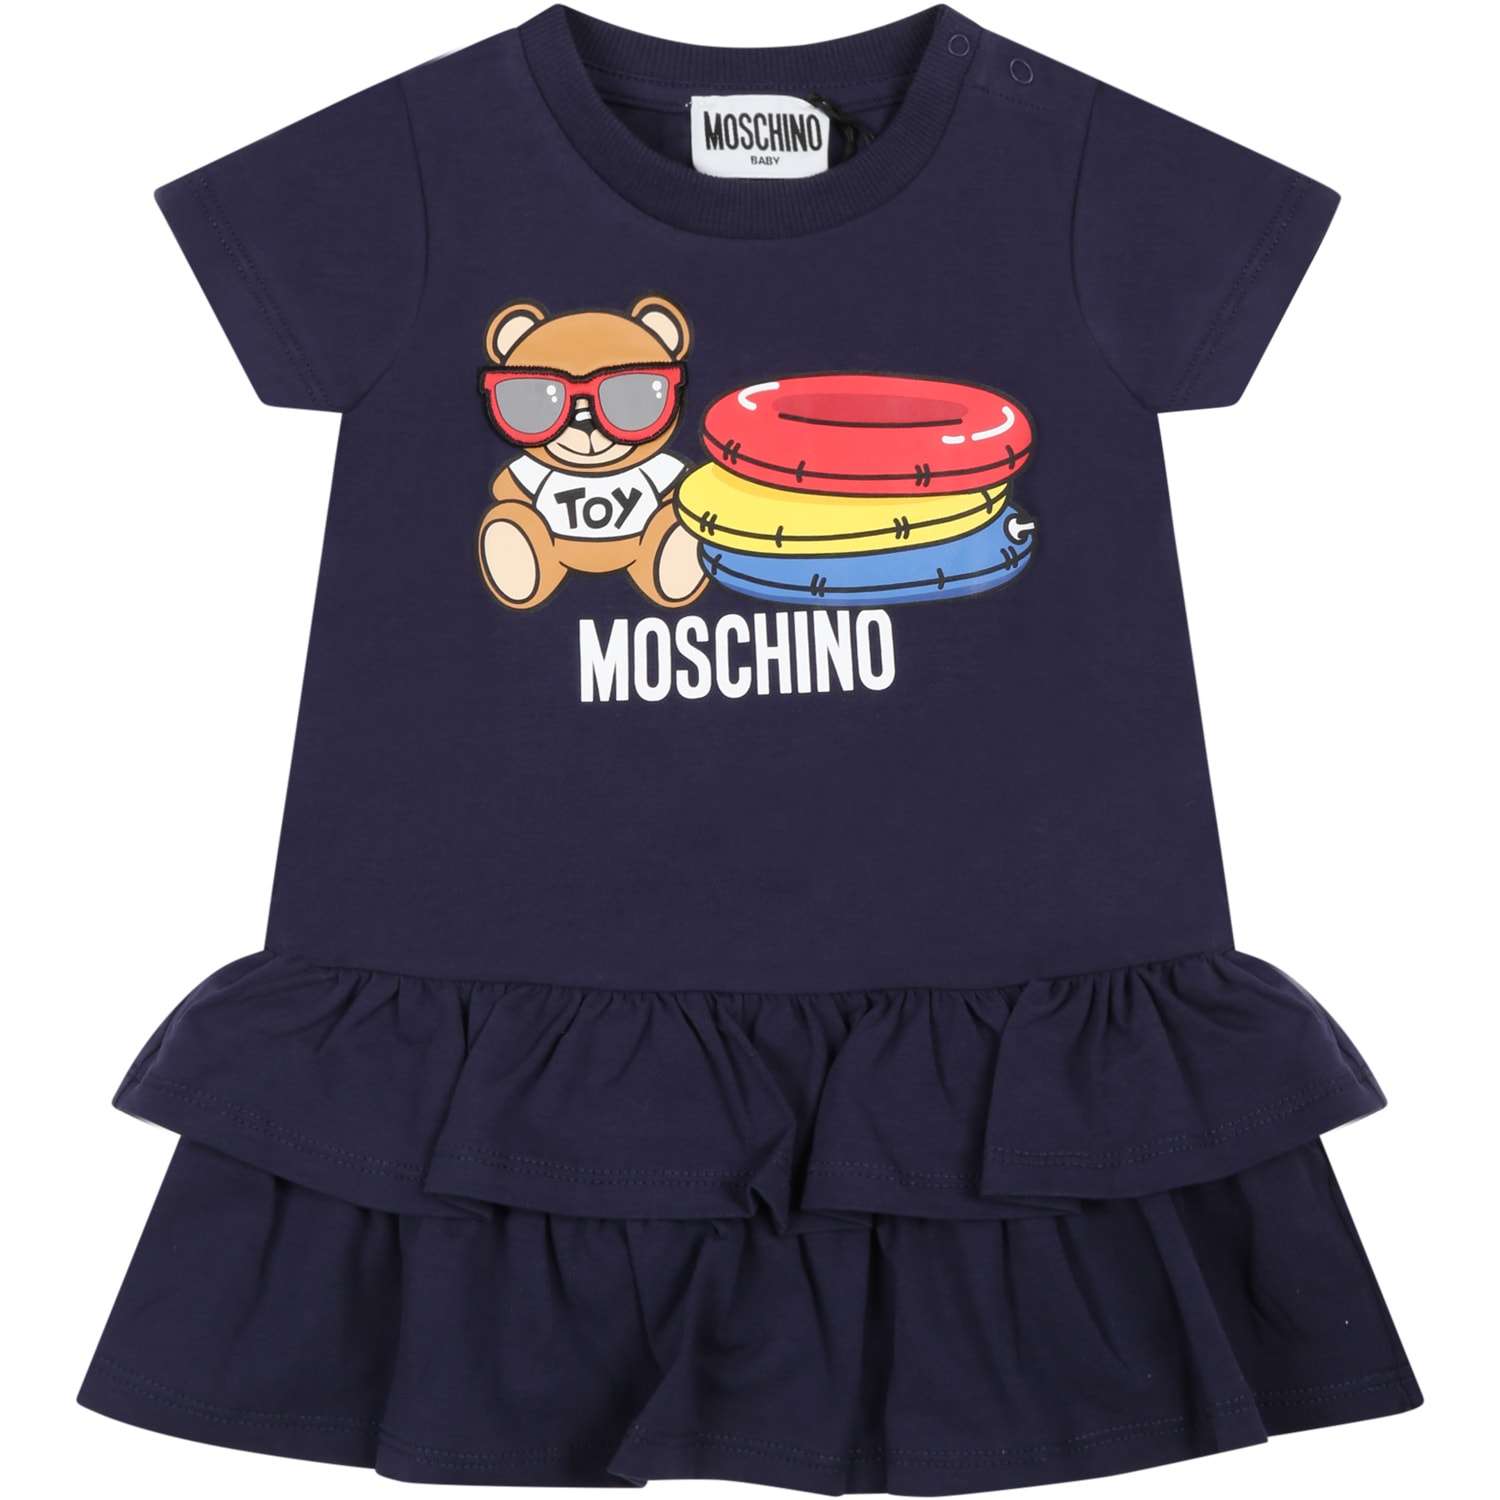 Moschino Blue Dress For Baby Girl With Teddy Bear